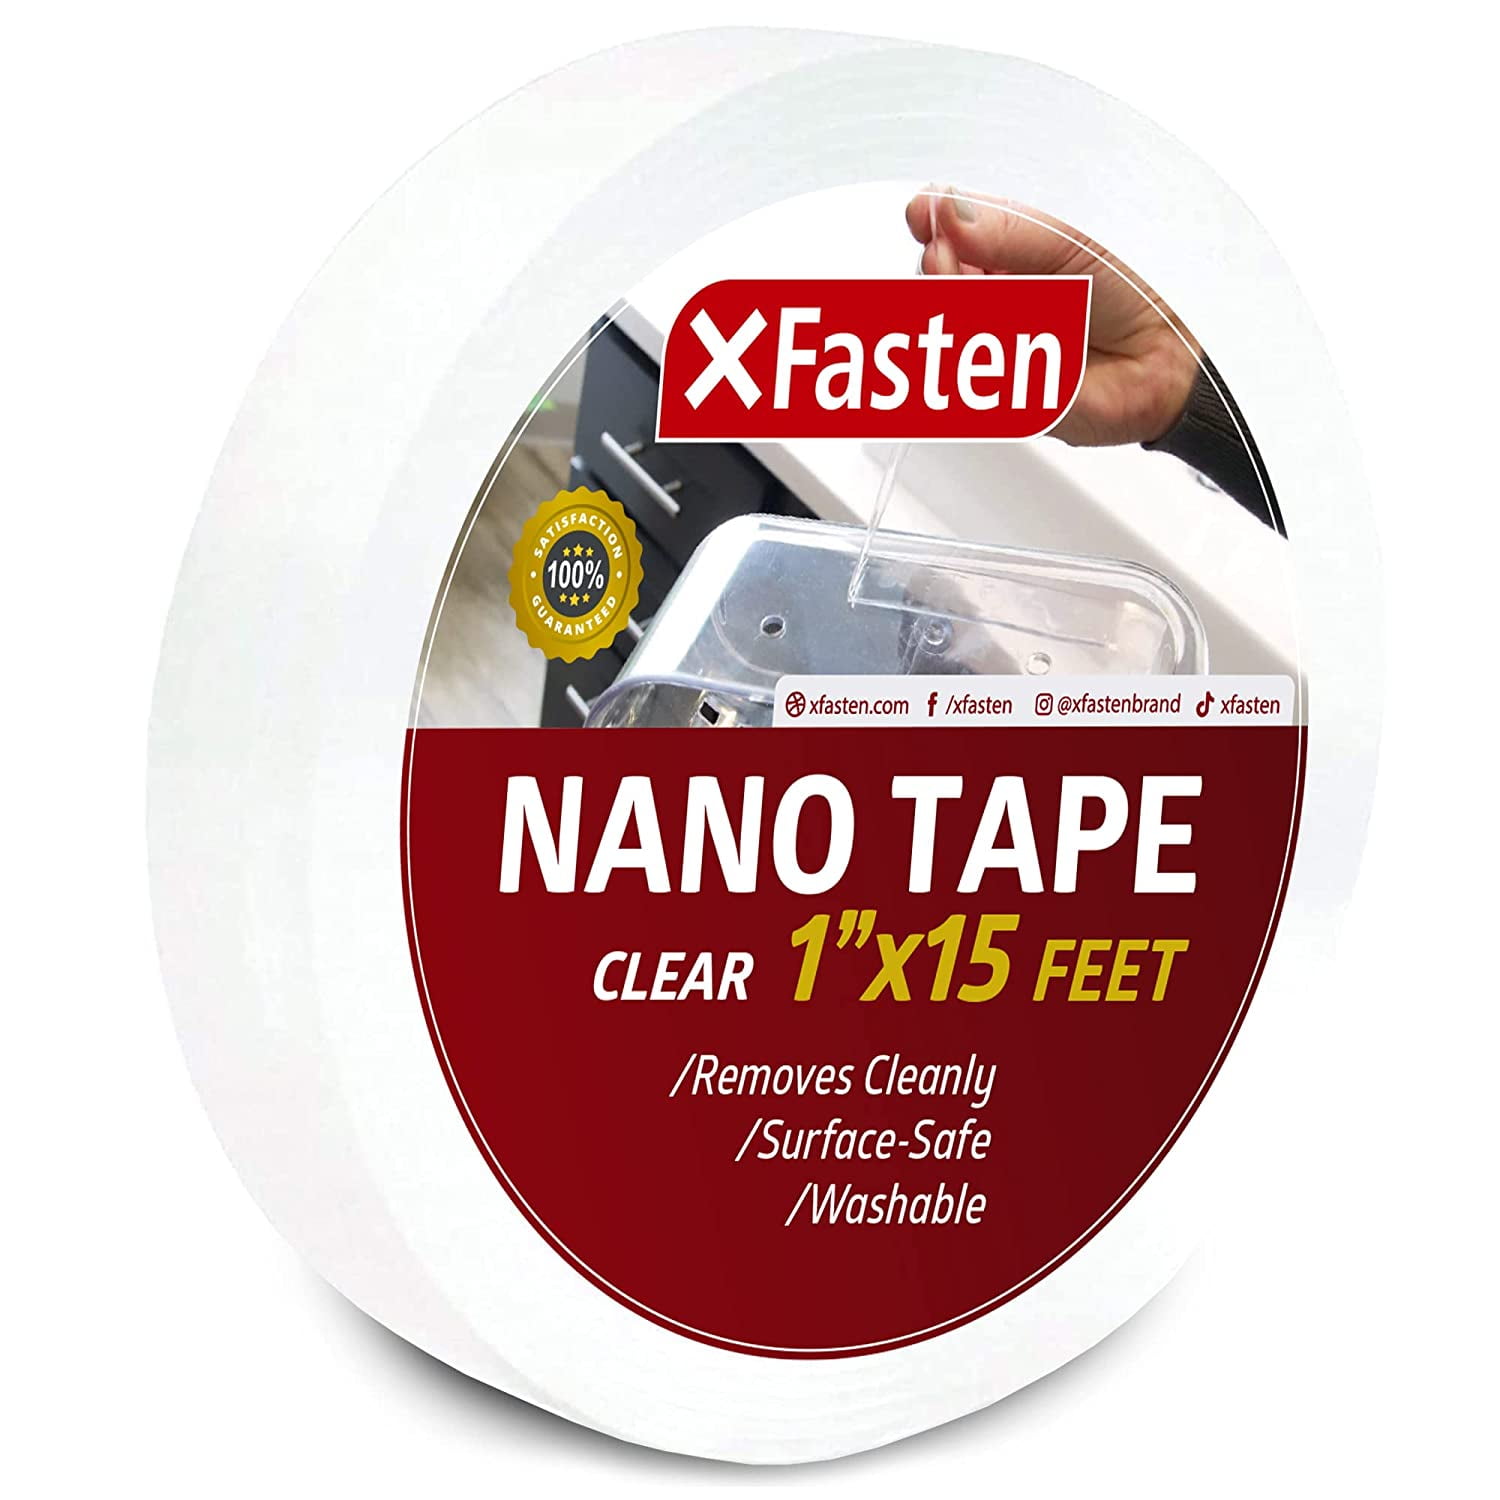 XFasten Reusable Double-Sided Nano Tape, 1-Inch x 15 Feet Traceless  Transparent Gel Grip Tape - Multifunction, Movable, Washable - Bathroom,  Kitchen Silicone Clear Mat Grip Adhesive Tape 